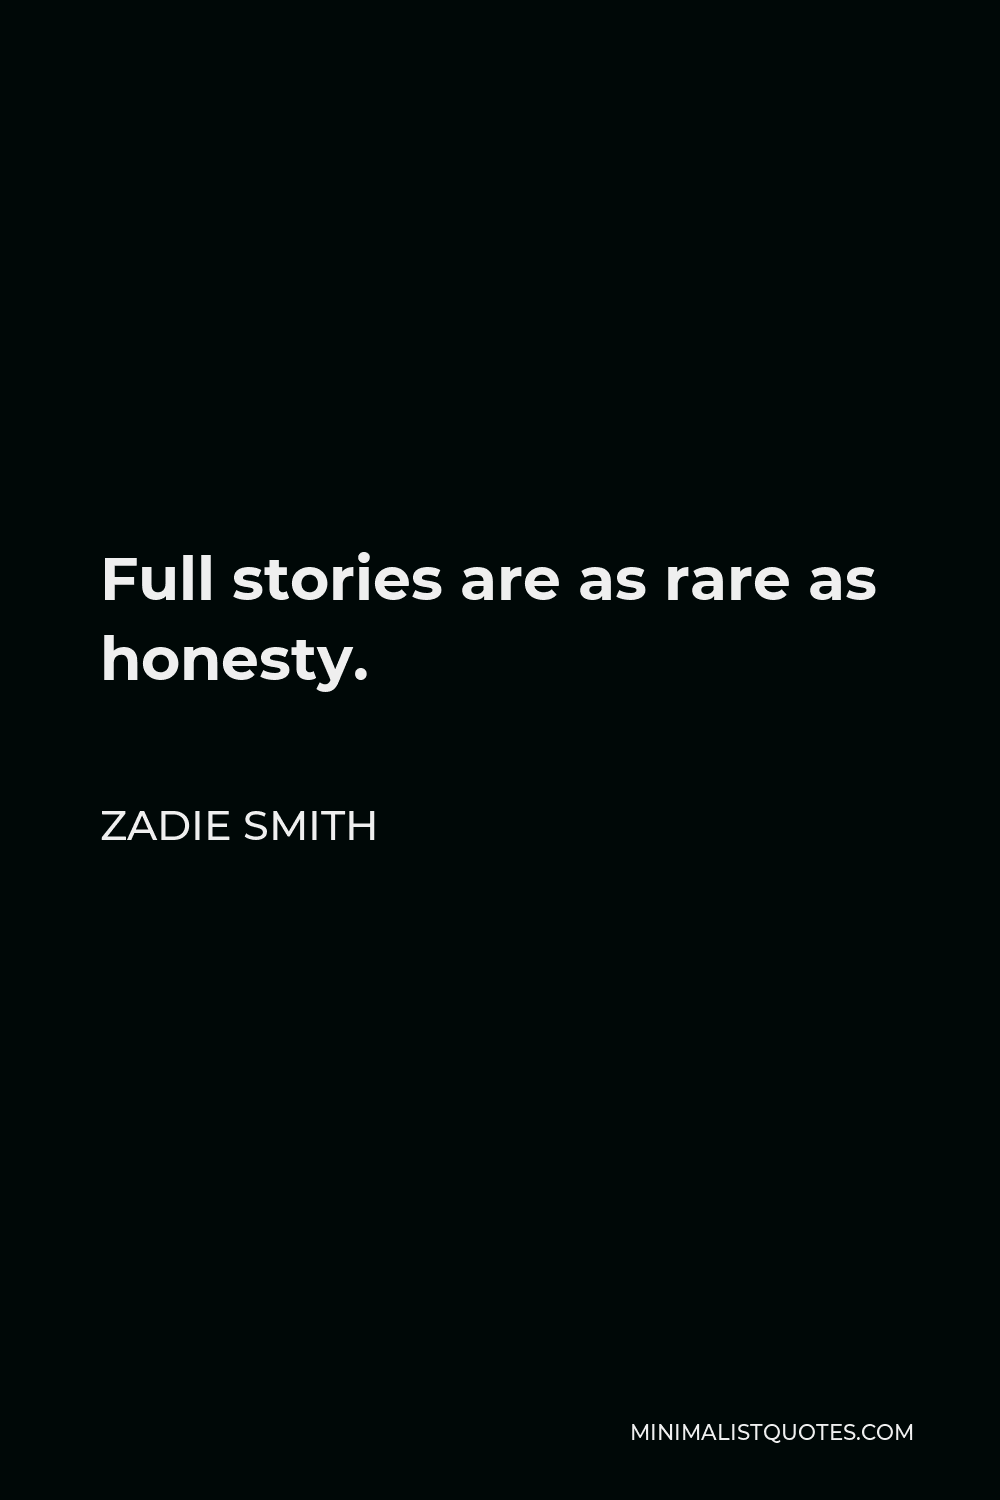 Zadie Smith Quote - Full stories are as rare as honesty.